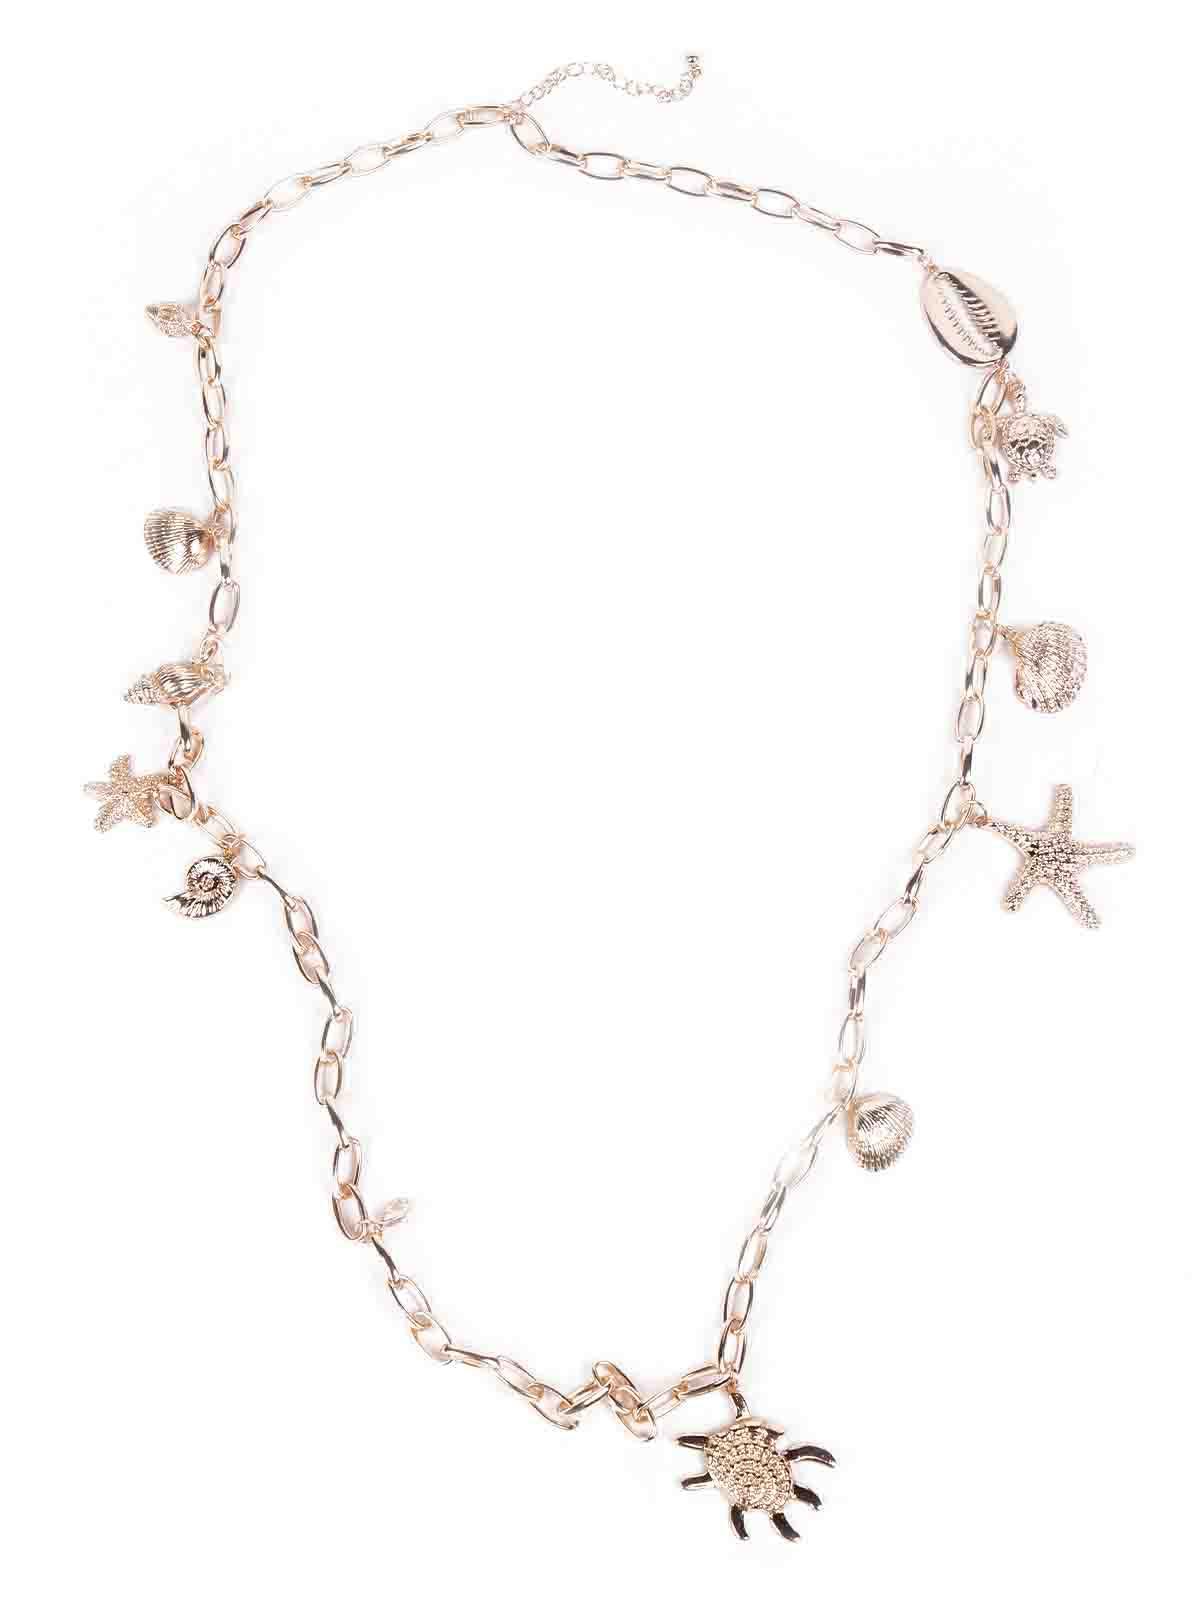 Women's Gold Necklace Embellished With Cute Charms - Odette